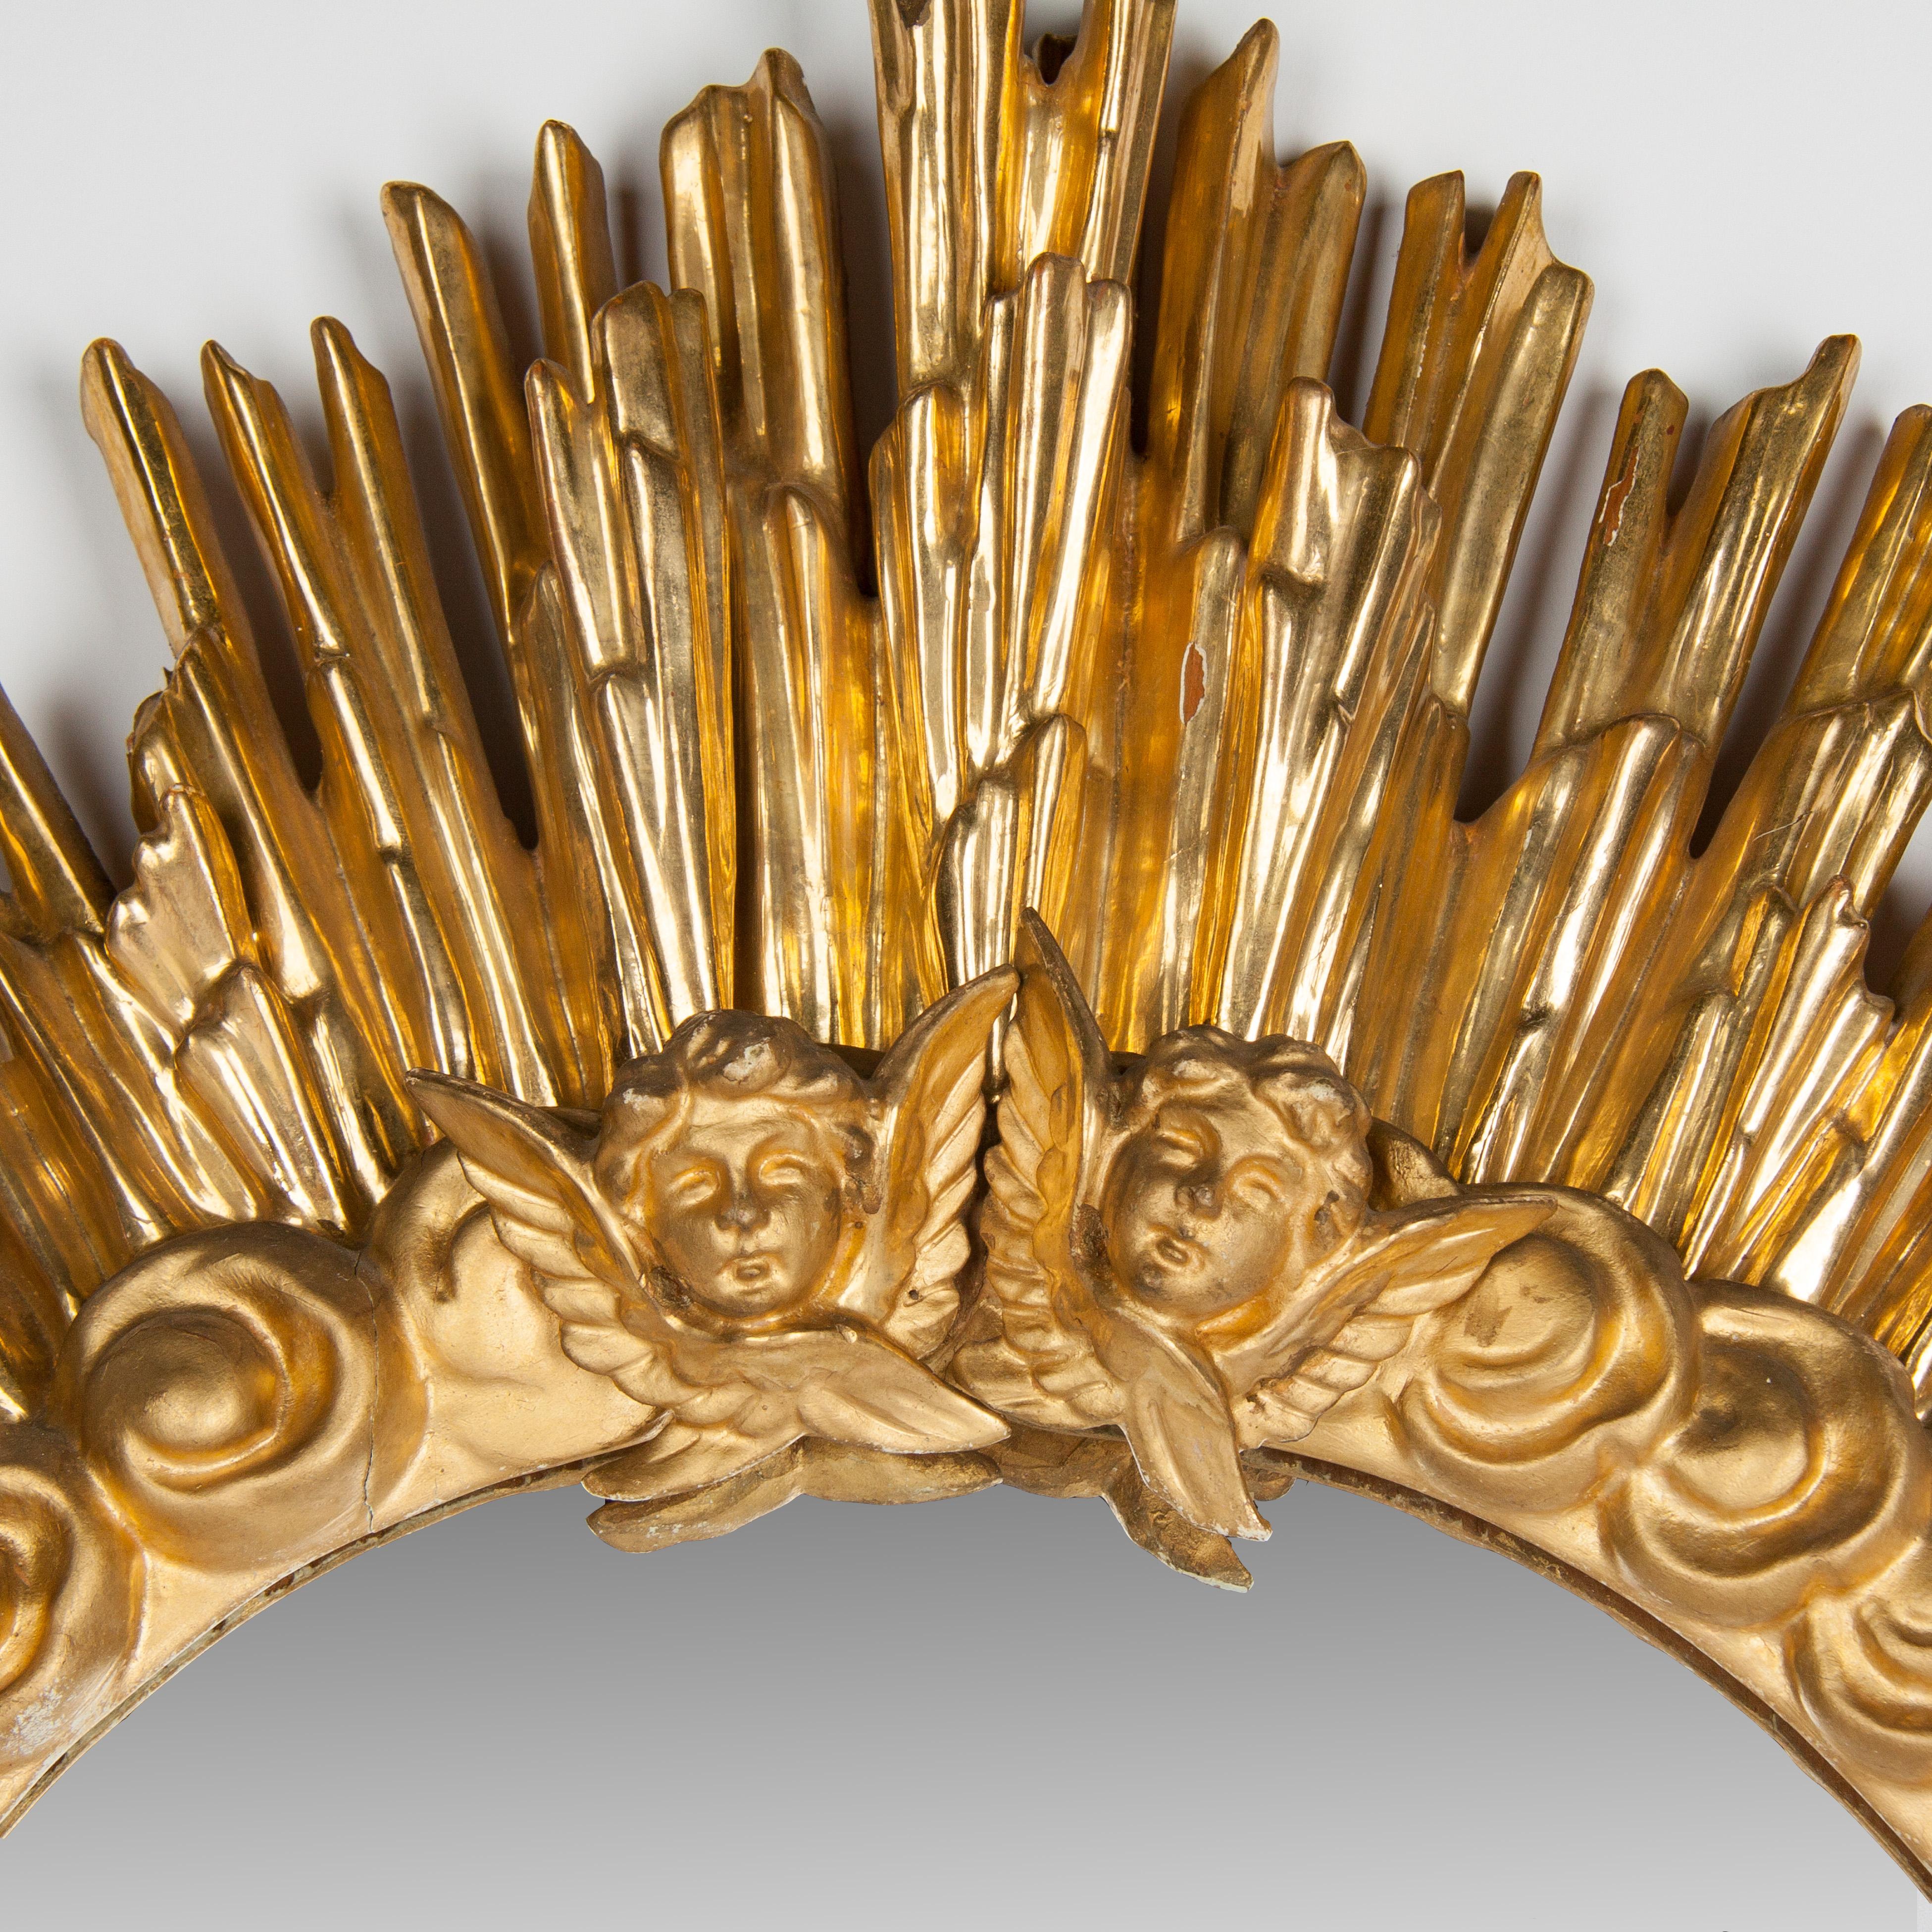 Late 18th century wooden carved sun
burst mirror finely decorated with cherub angel heads.
Gold gilt and polychrome.